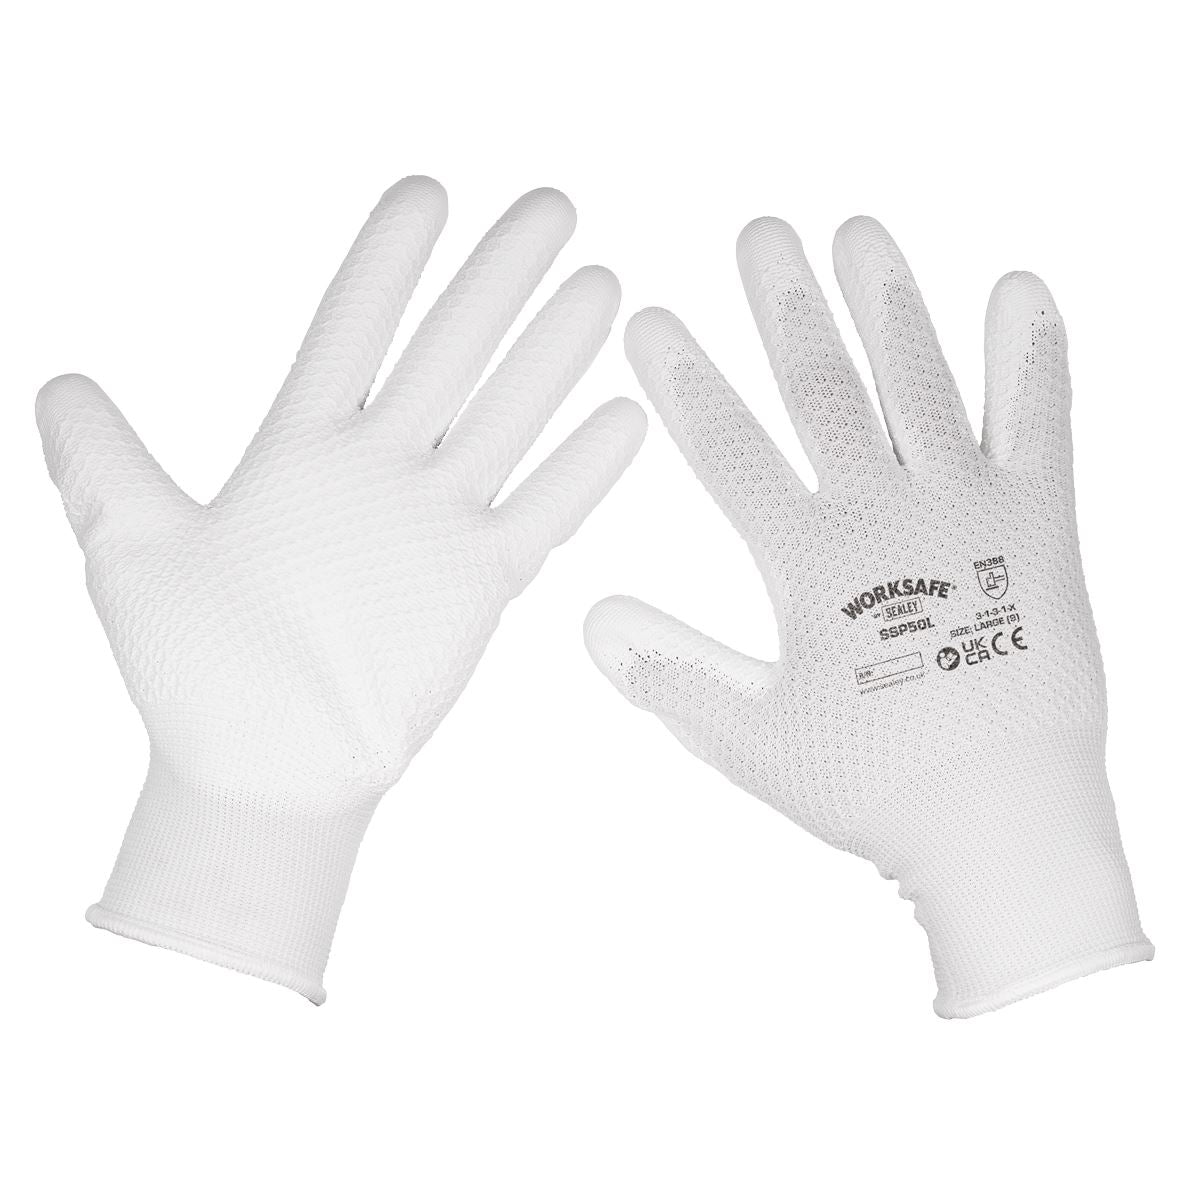 Worksafe by Sealey White Precision Grip Gloves Large – Pair